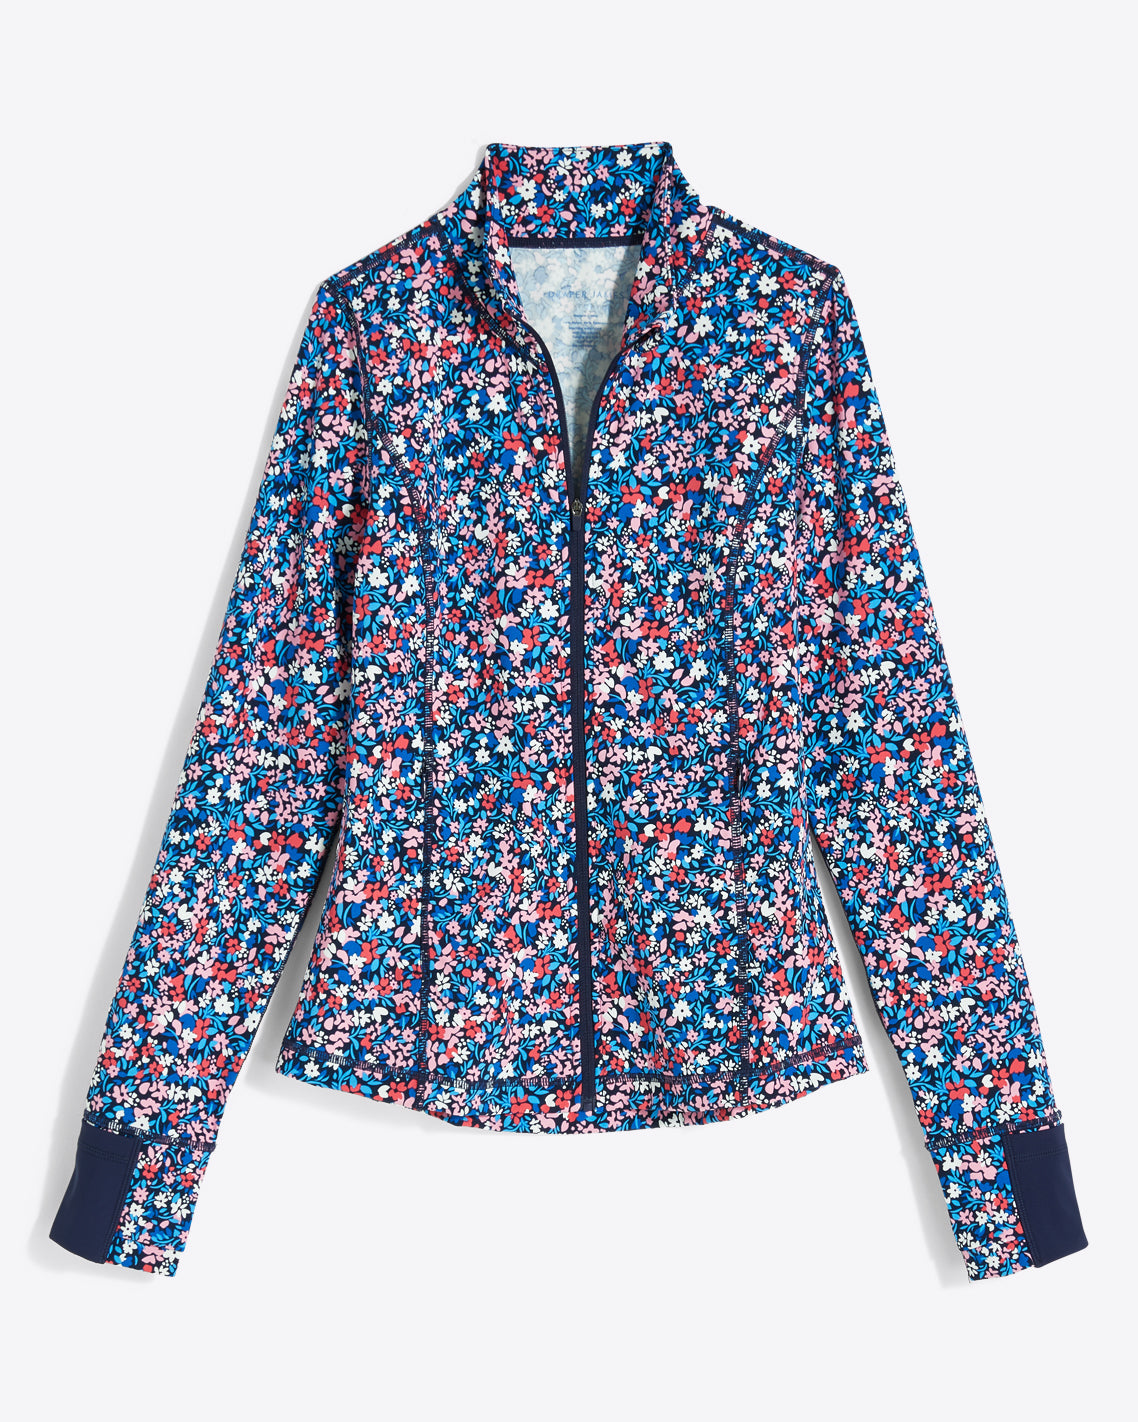 Warm Up Jacket in Allover Ditsy Floral